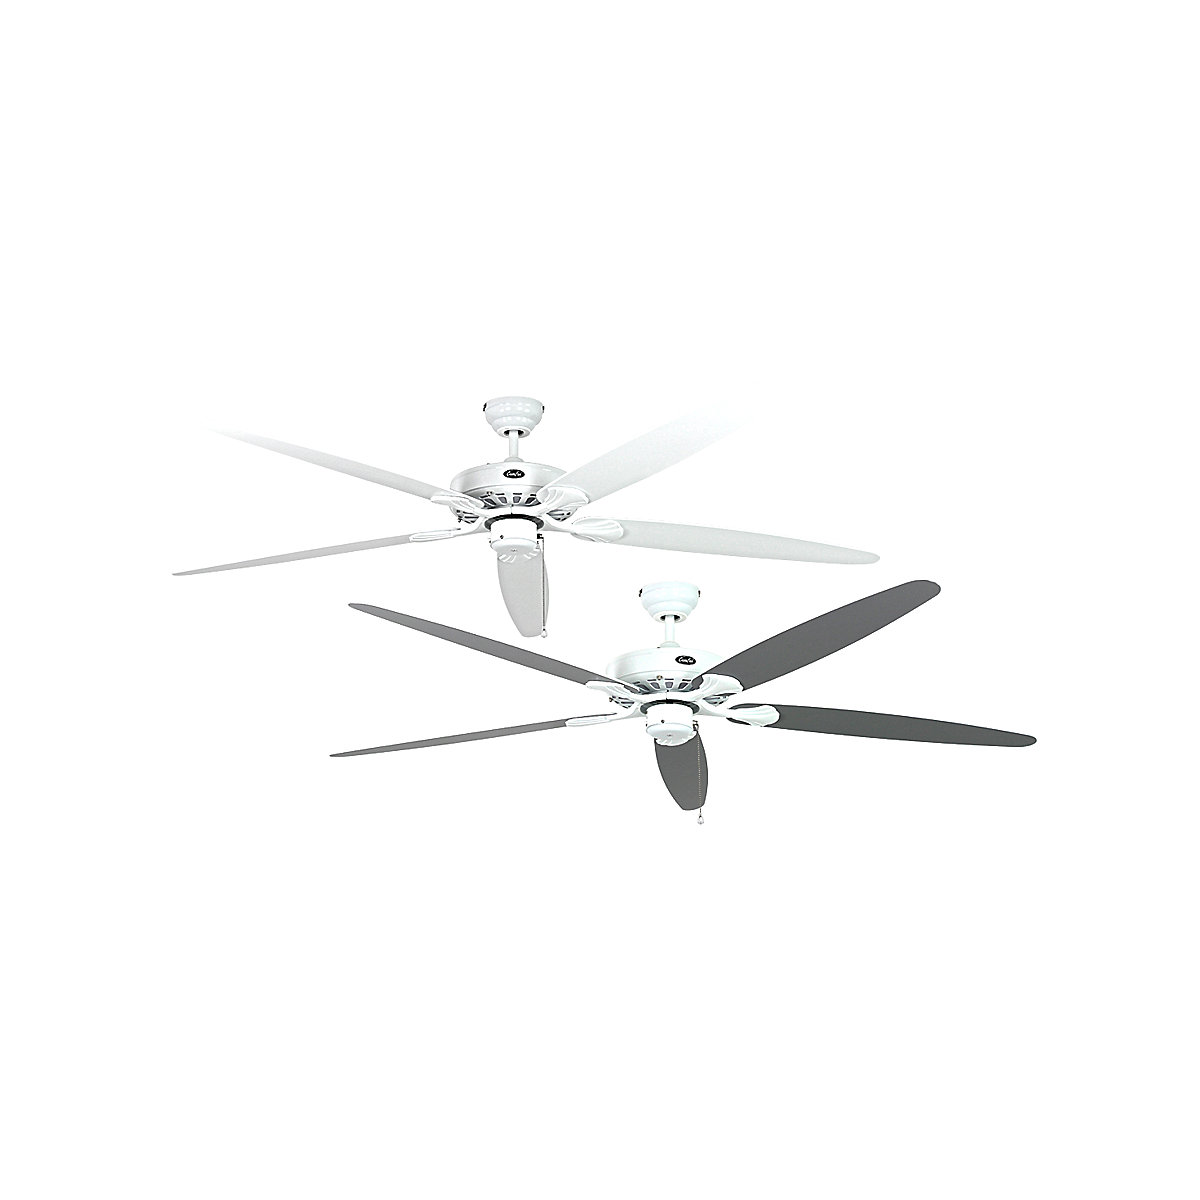 CLASSIC ROYAL ceiling fan, rotor blade Ø 1800 mm, painted white / painted light grey-3